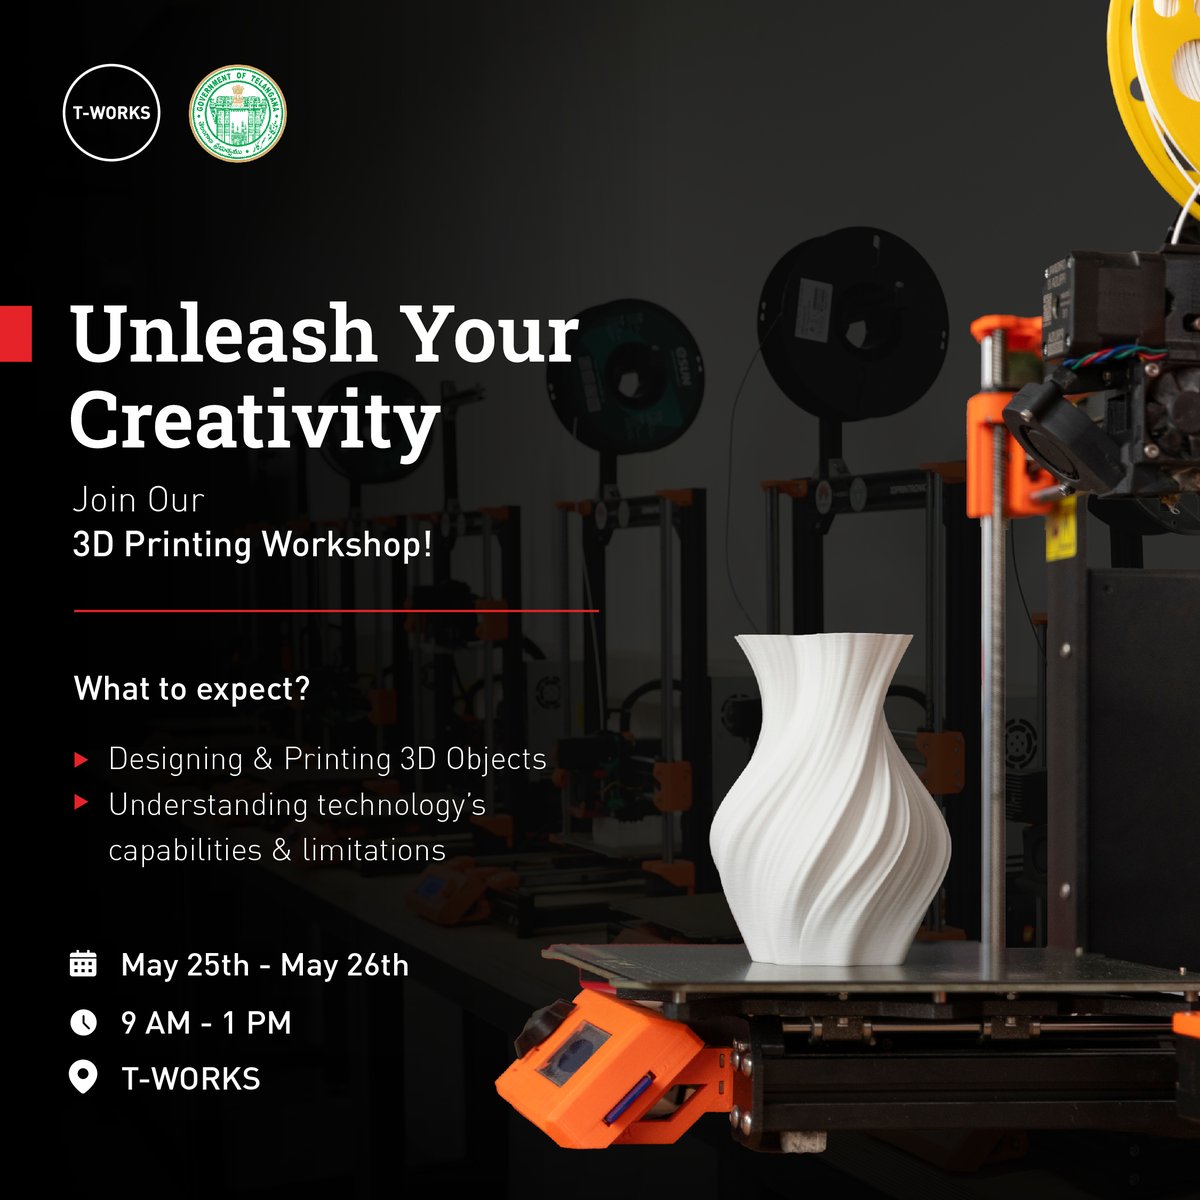 Calling all 3D printing enthusiasts! Join us at T-Works on May 25-26 from 9am-1pm for a hands-on workshop to unleash your creativity. Don't miss out on this amazing opportunity to learn and grow! growezy.club/tworks/events/…